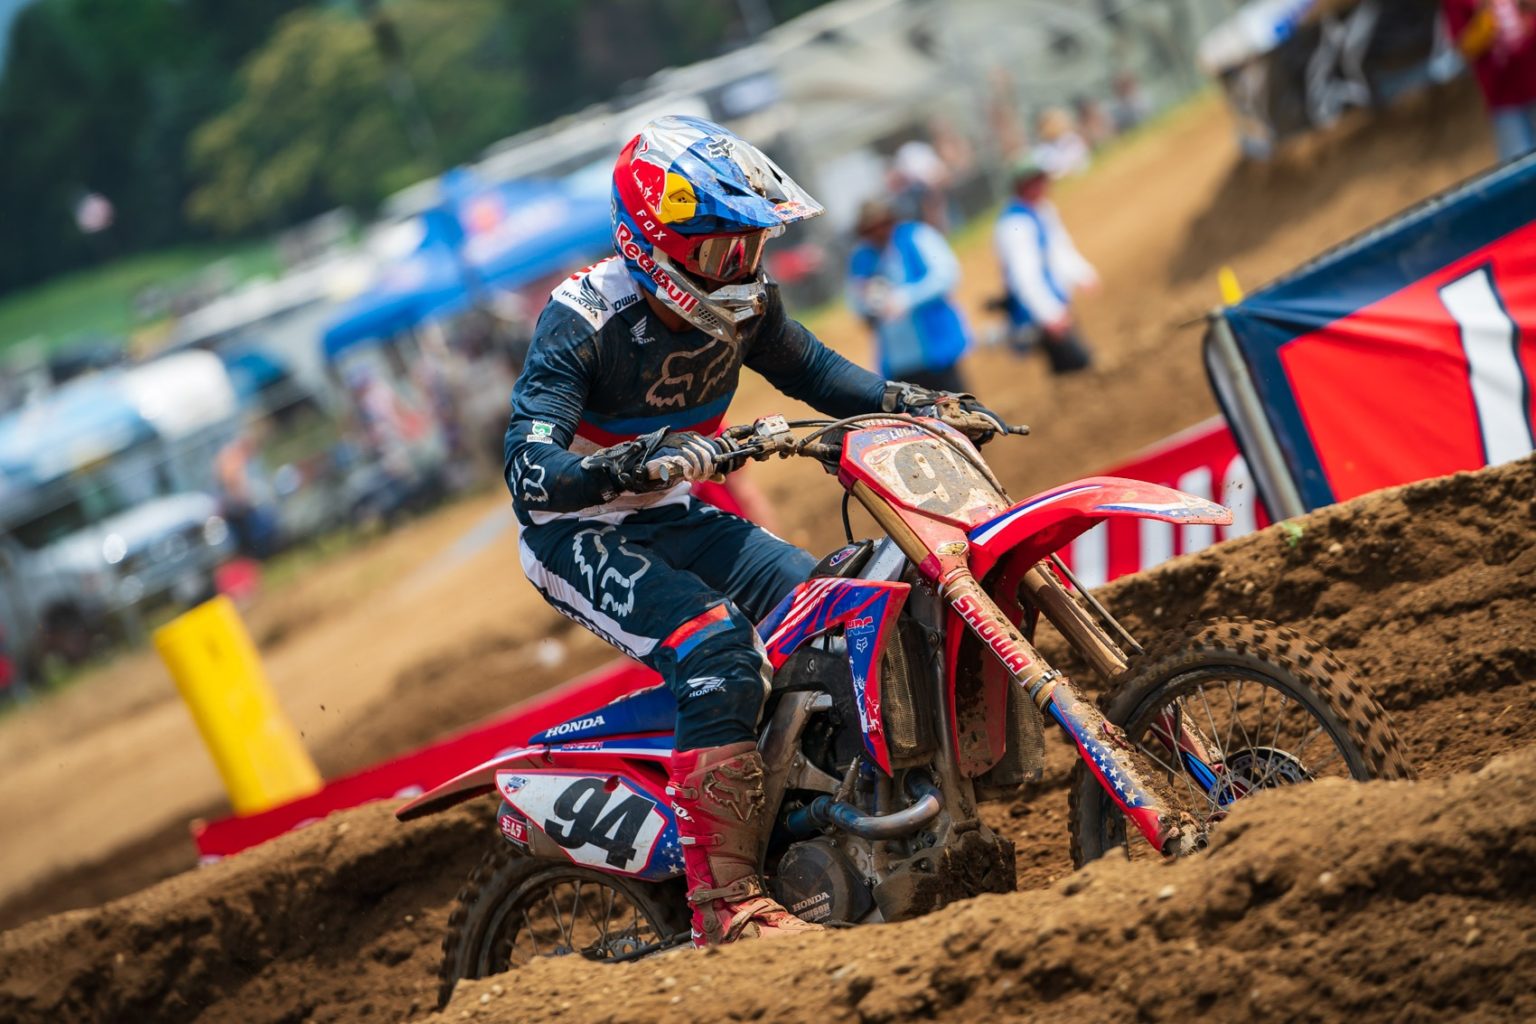 Pro Motocross | 2020 Schedule Release Pushed Back - Swapmoto Live